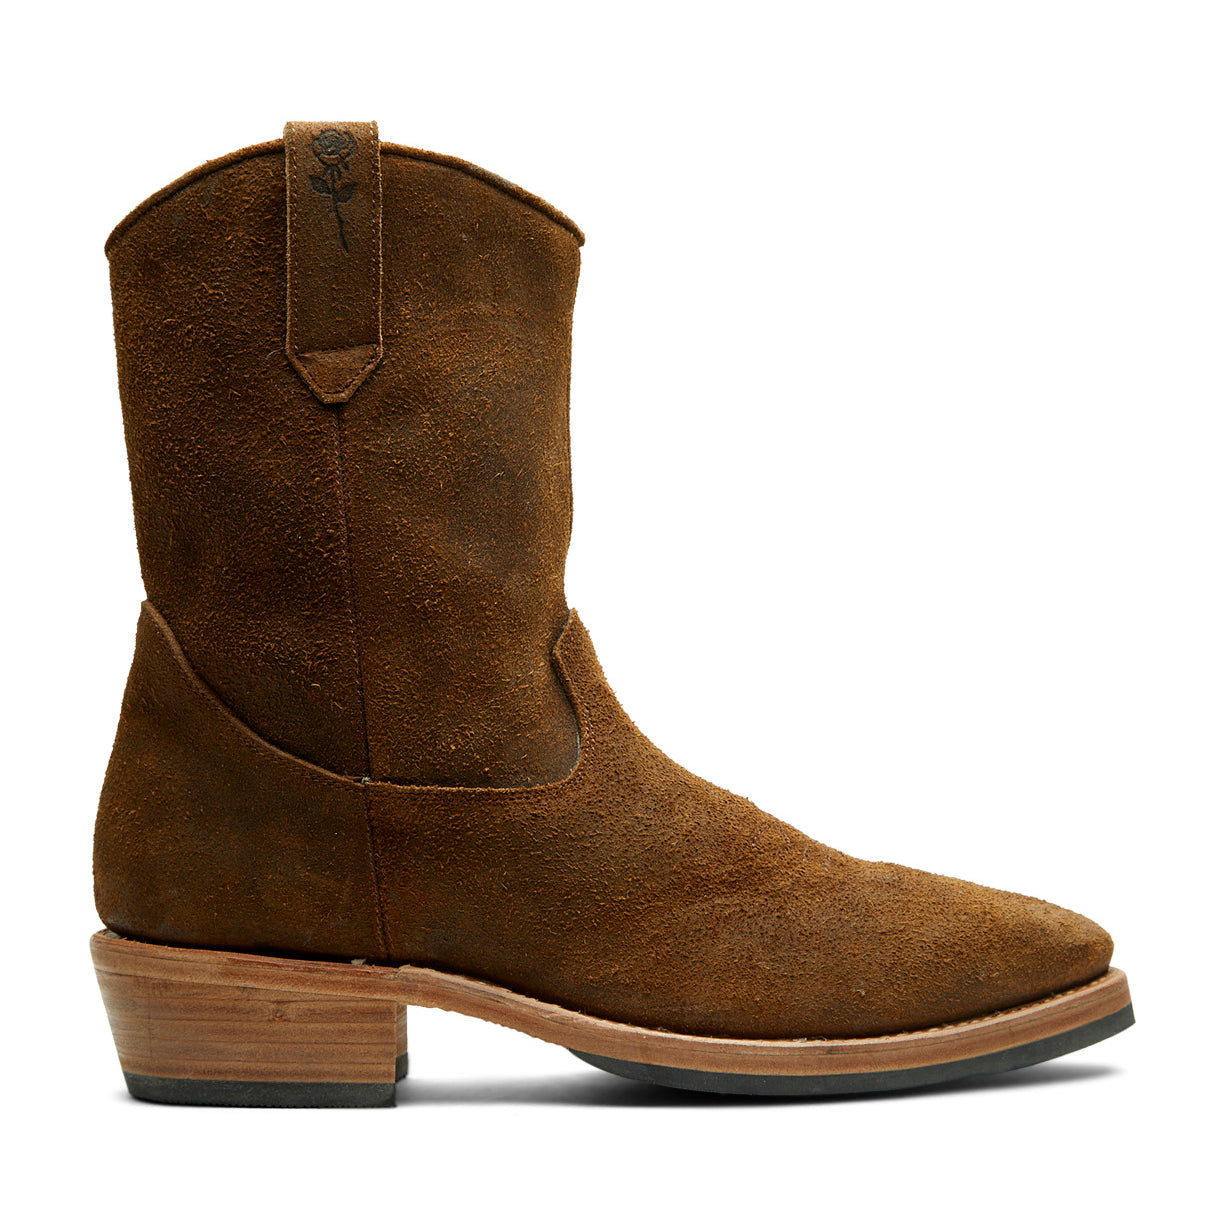 A brown Santa Rosa Brand Issac Cowboy boot on a white background featuring American Bison suede leather upper and natural vegetable tanned leather lining.